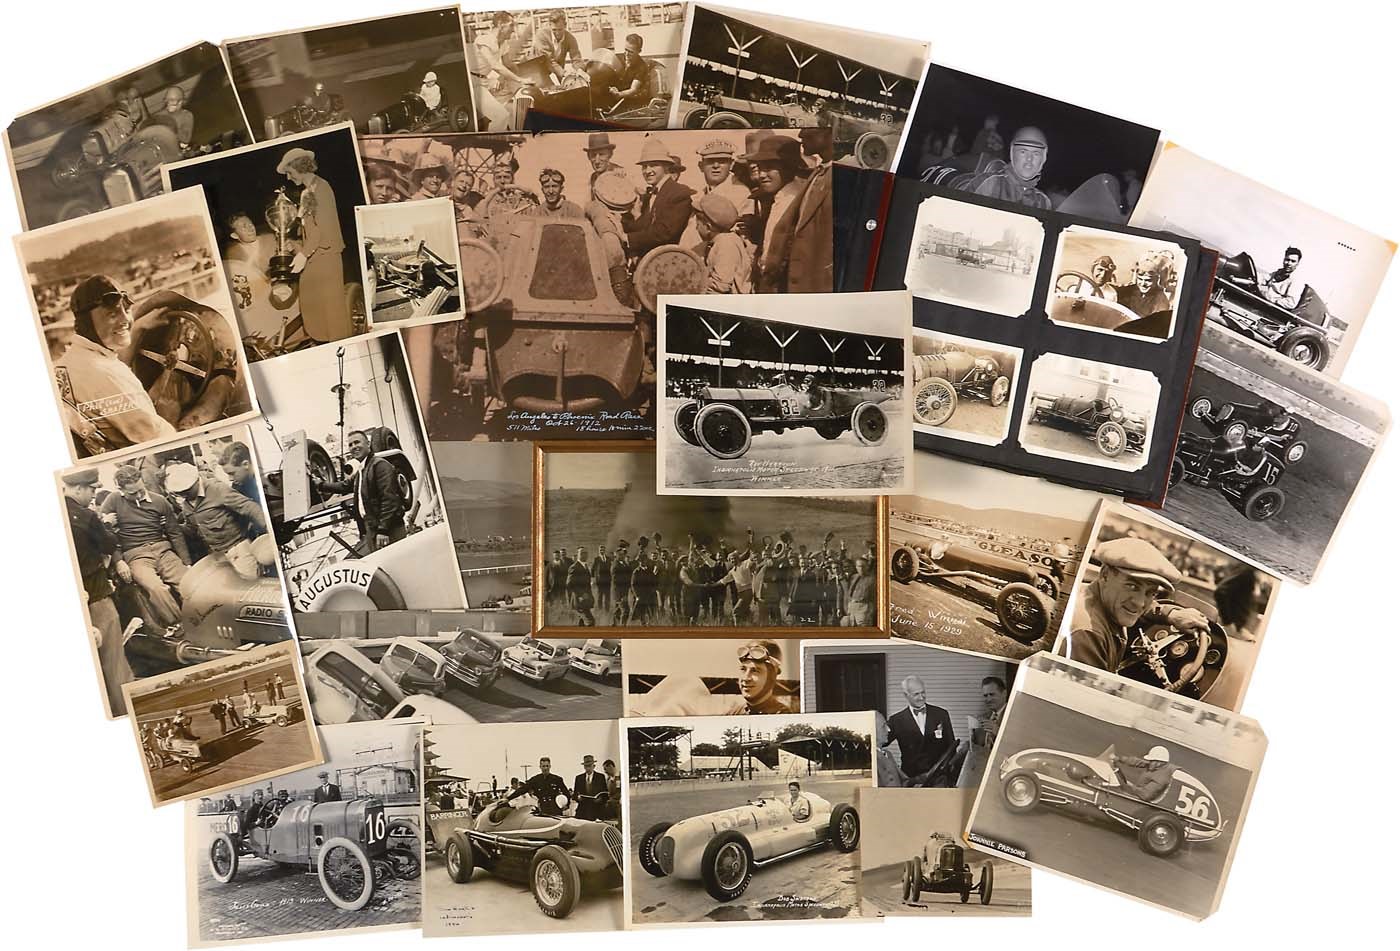 1900s-60s Early Auto Racing Photograph Collection (700+)